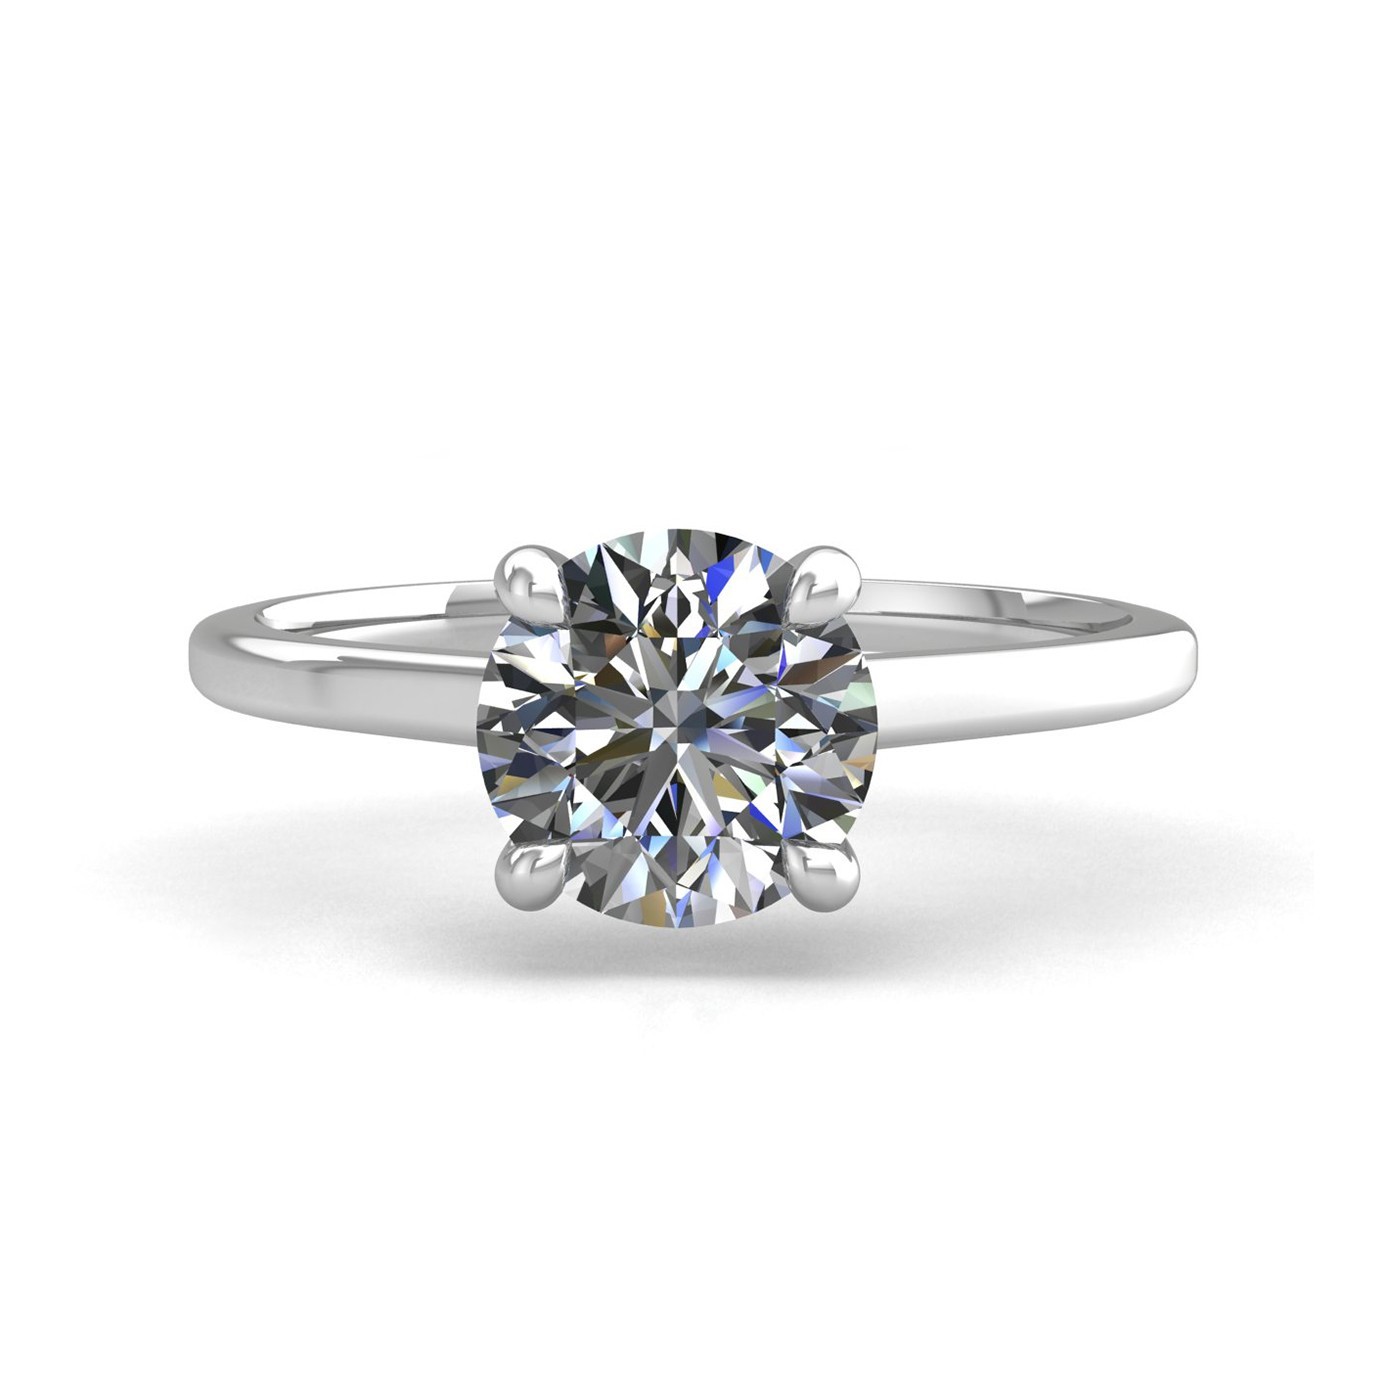 18k white gold 1.5ct 4 prongs solitaire round cut diamond engagement ring with whisper thin band Photos & images